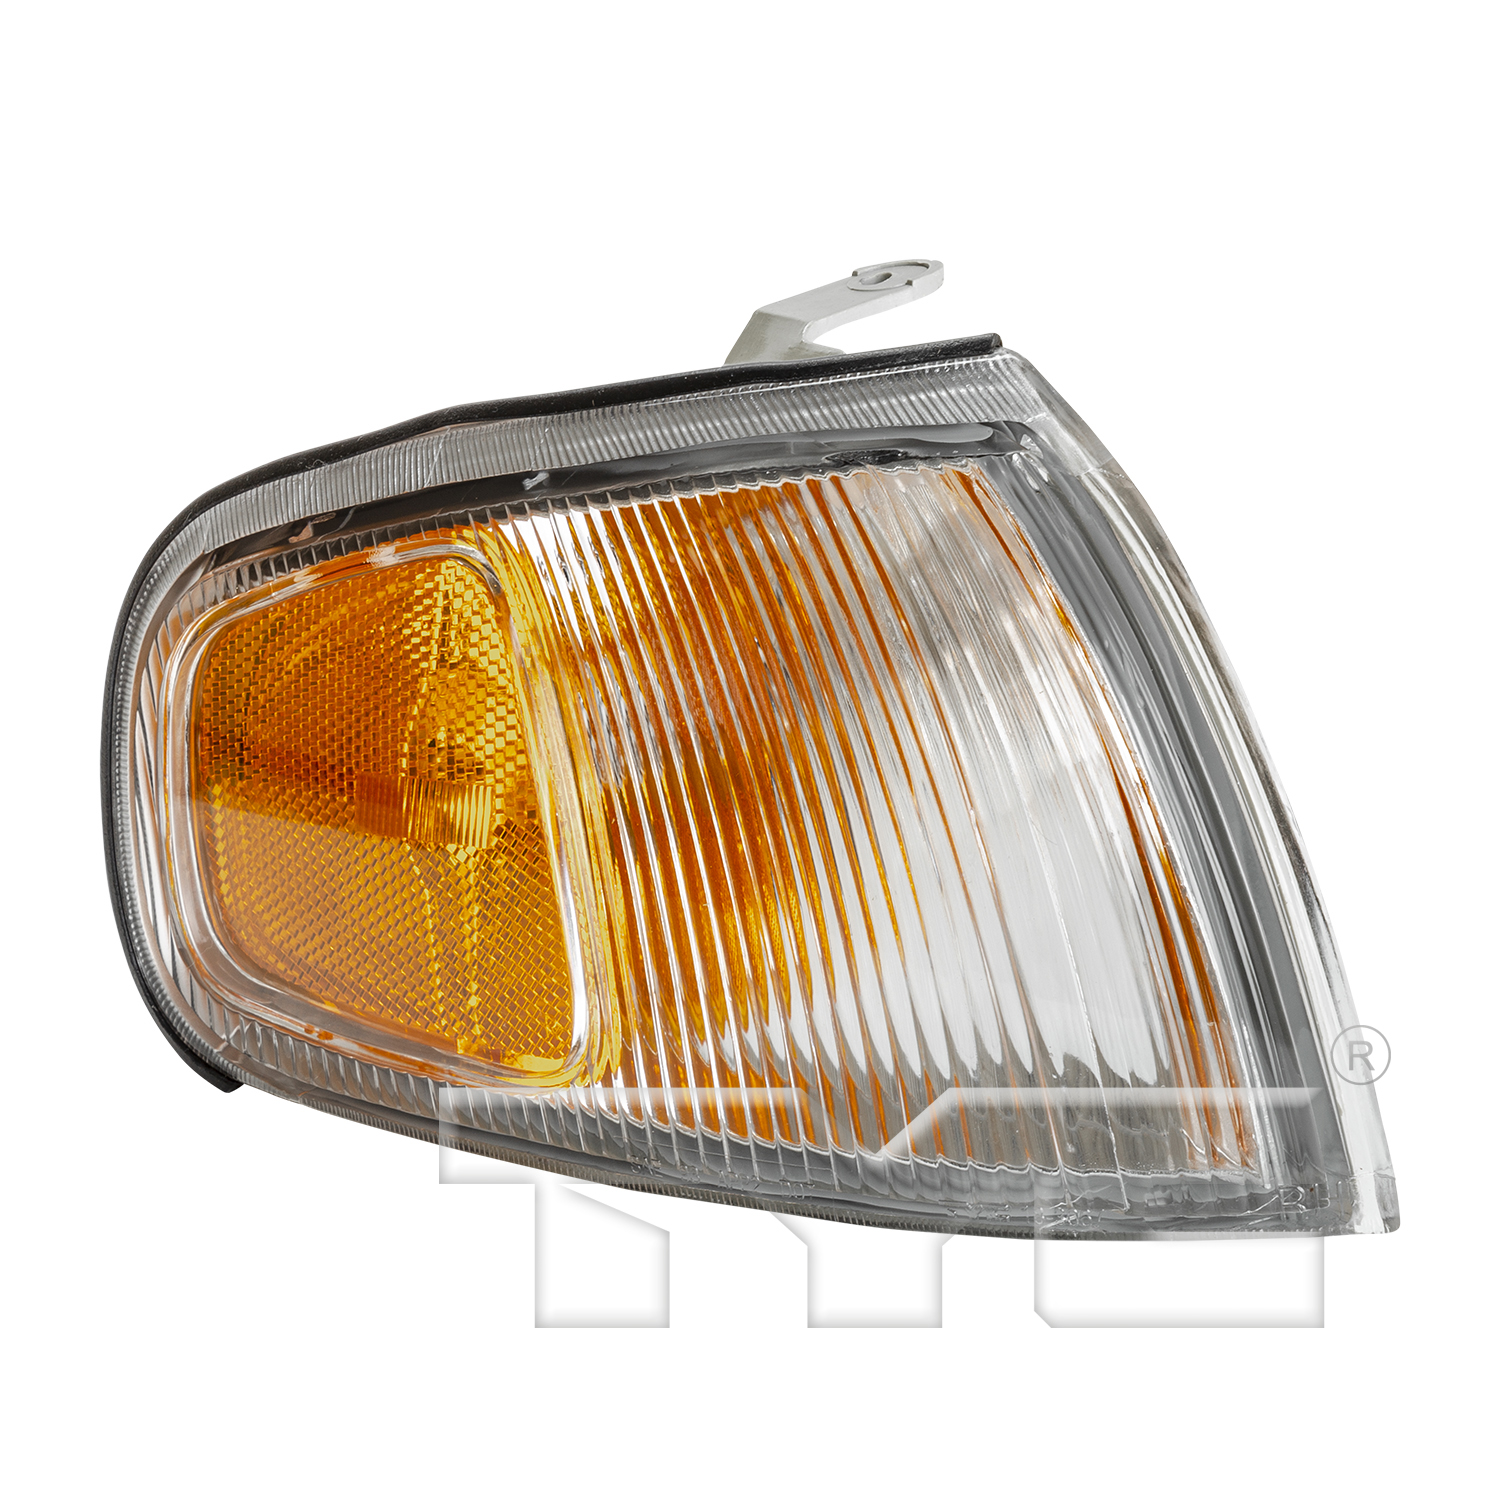 Aftermarket LAMPS for TOYOTA - CAMRY, CAMRY,95-96,RT Parklamp assy